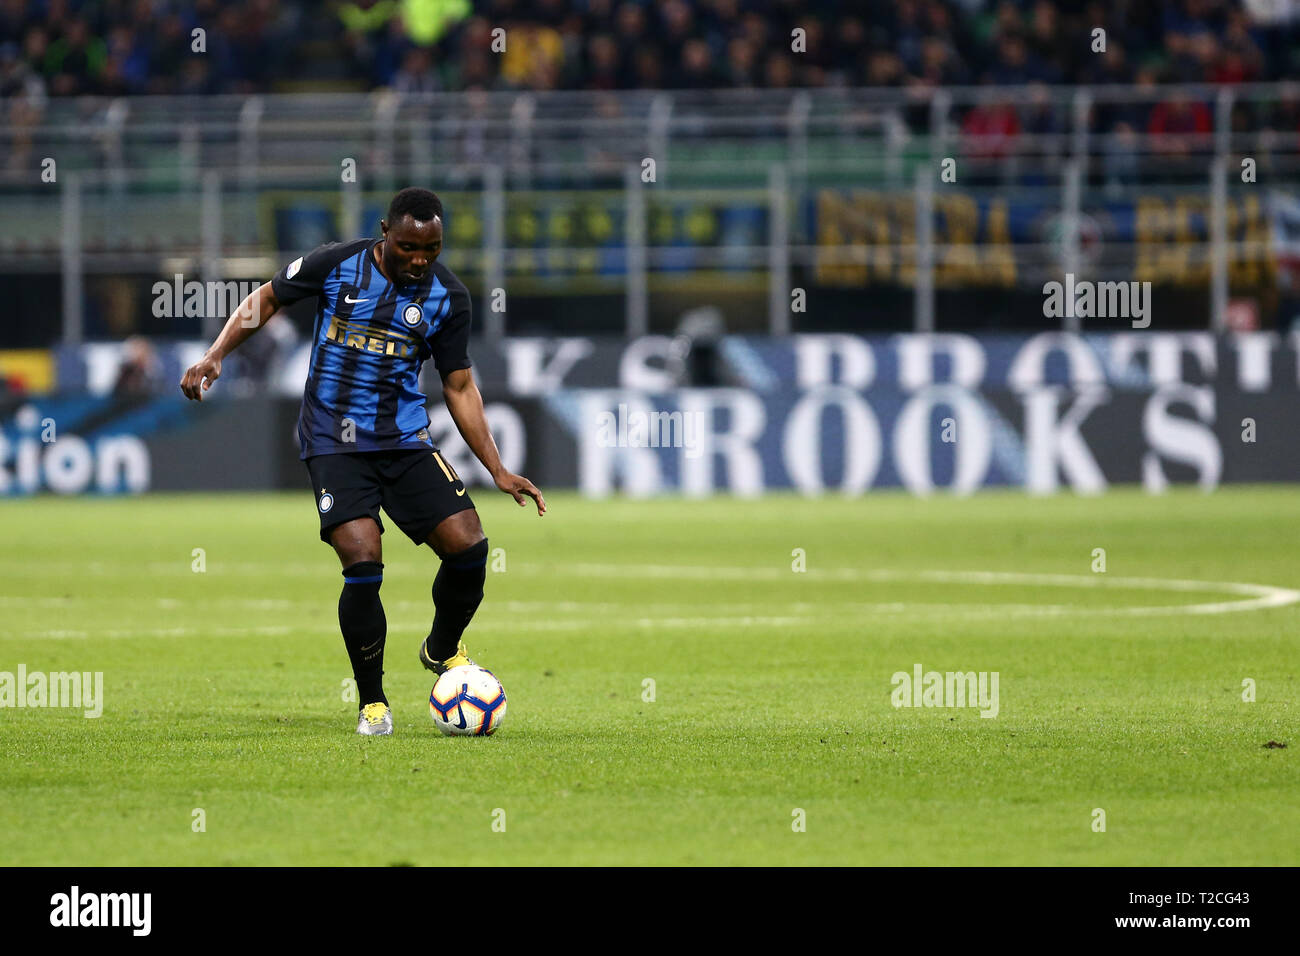 Milano, Italy. 31st Mar, 2019. Kwadwo Asamoah of FC Internazionale in action during the Serie A match between FC Internazionale and Ss Lazio. Credit: Marco Canoniero/Alamy Live News Stock Photo